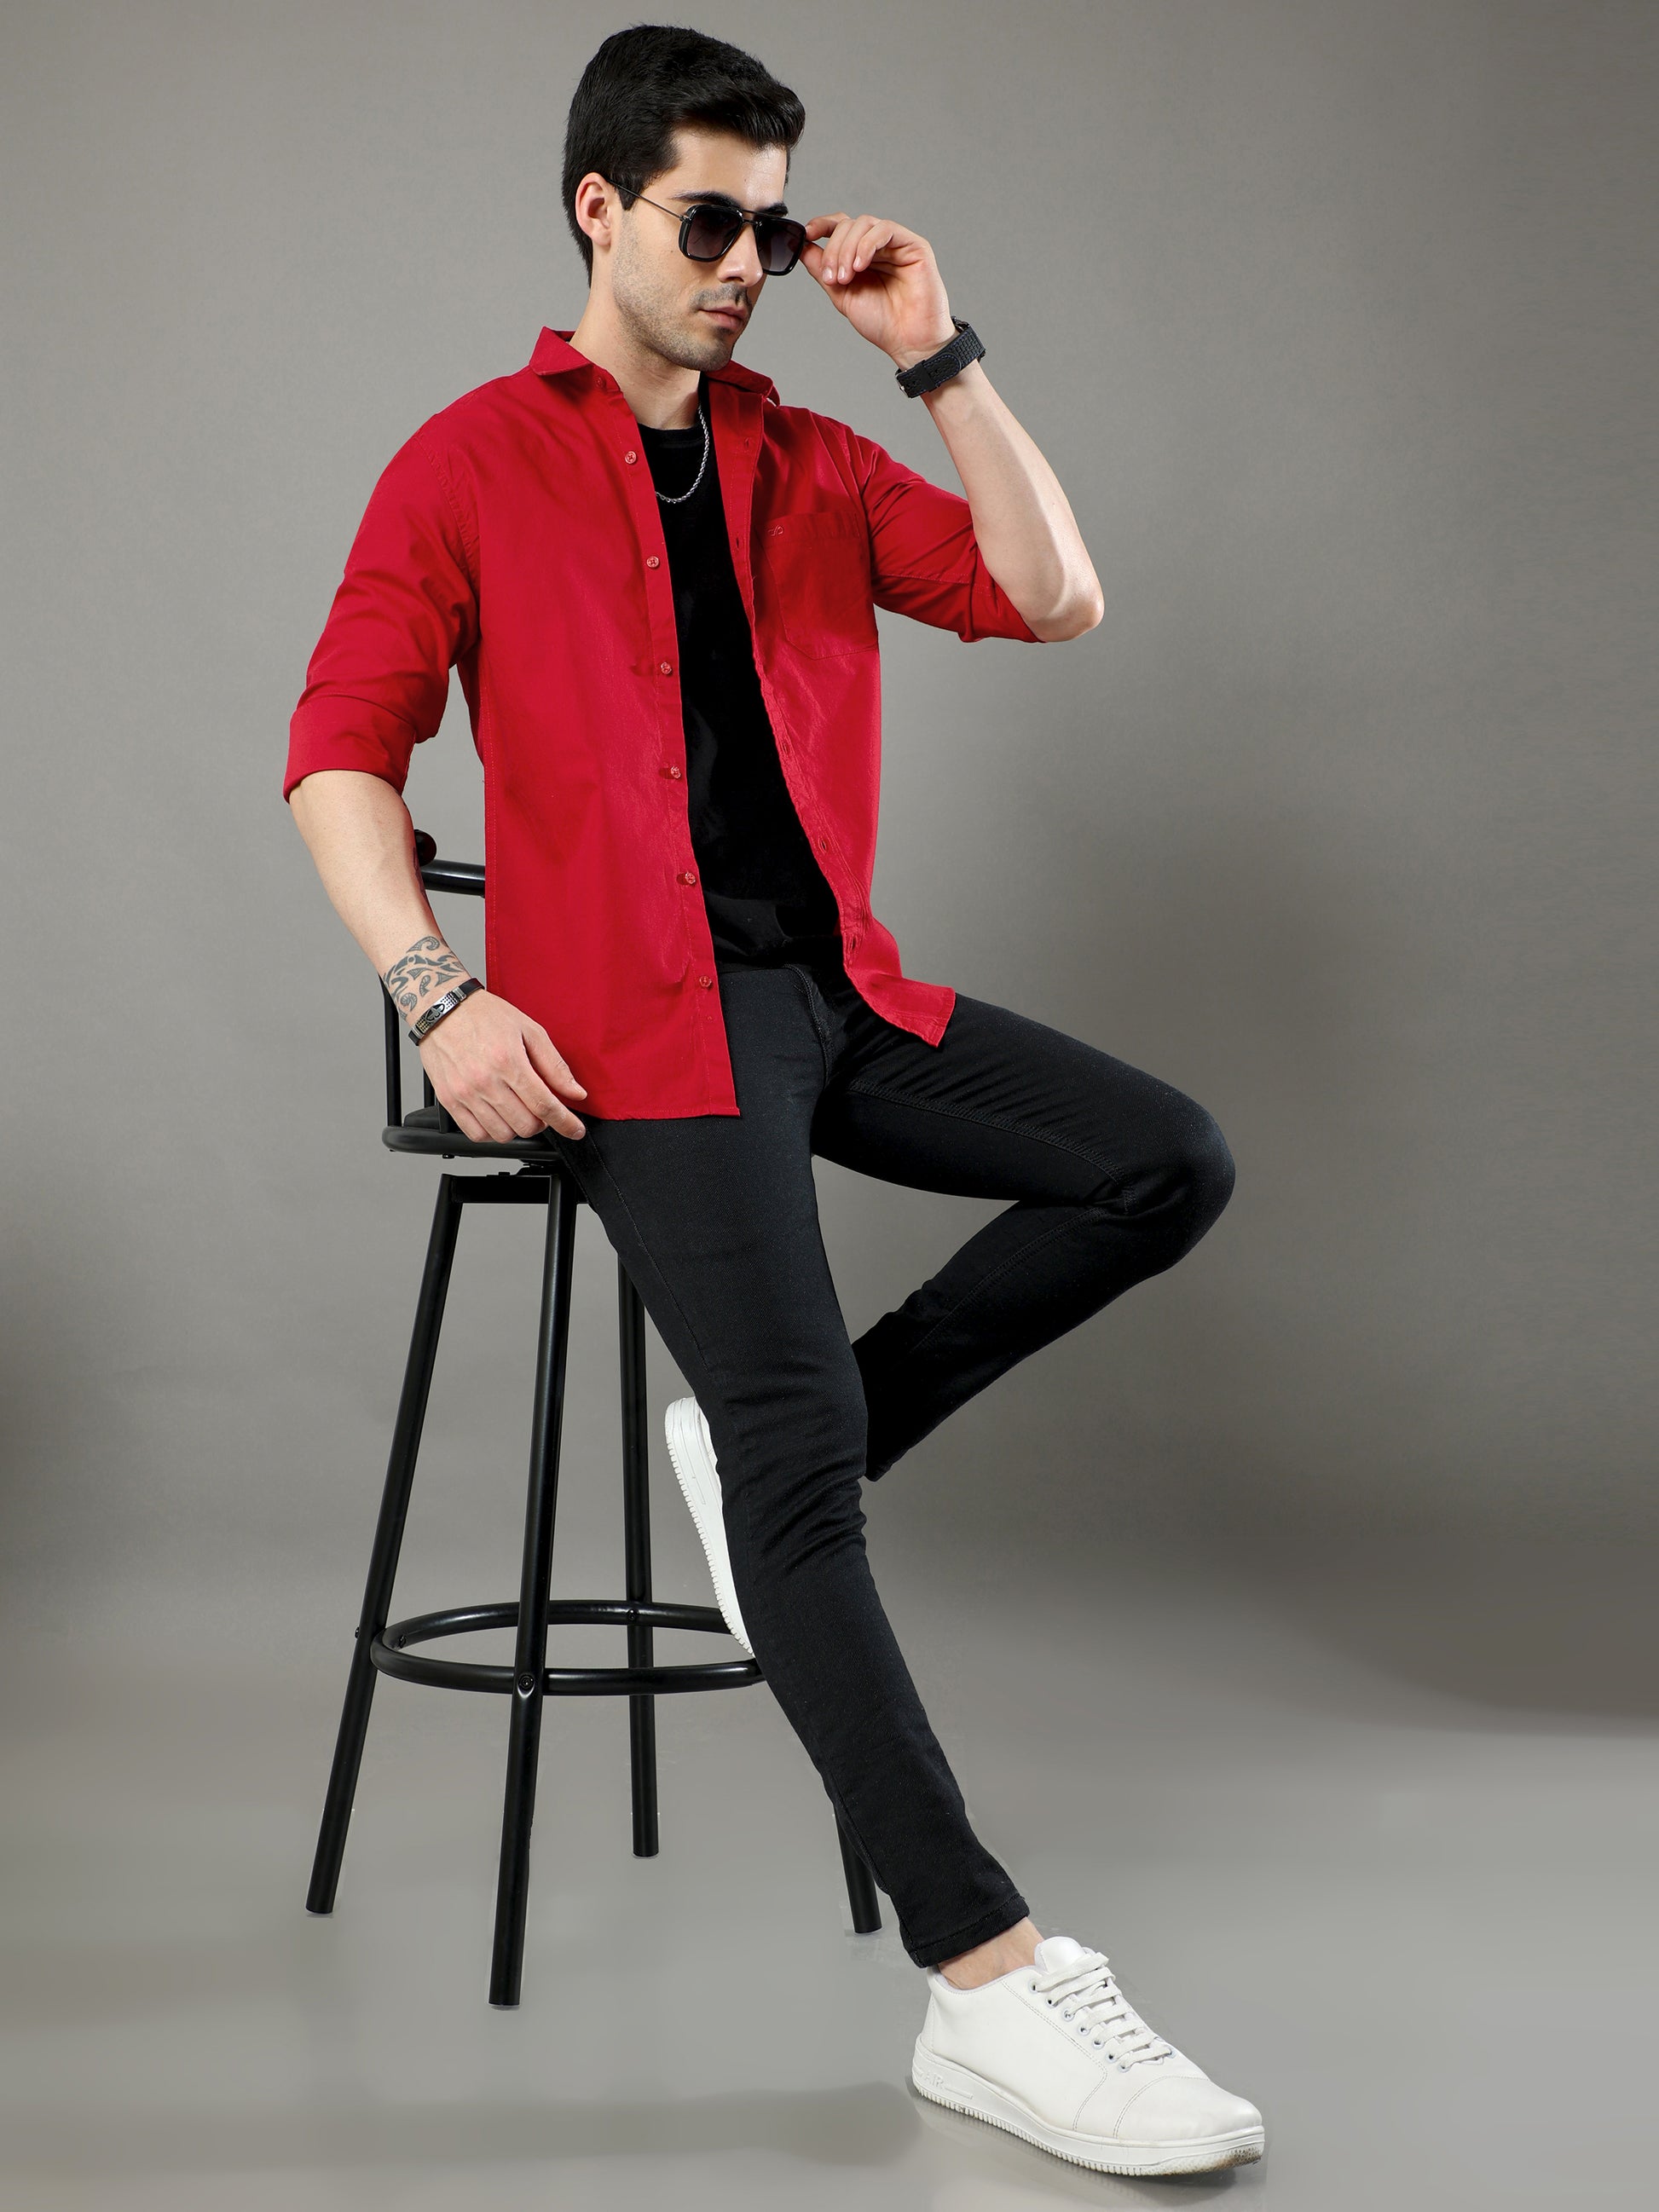 Cornell Red Solid Shirt